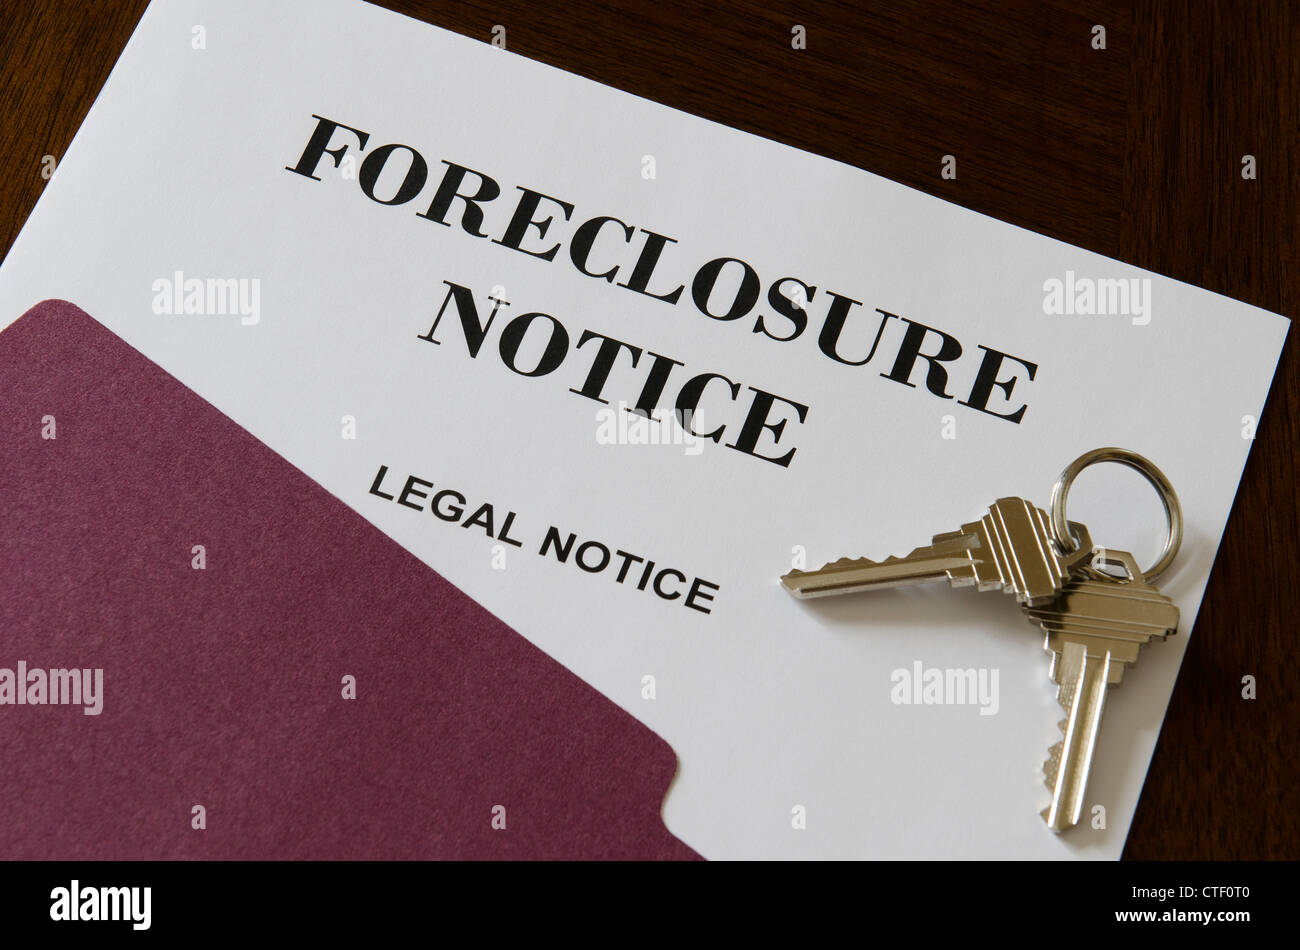 Real Estate Home Foreclosure Legal Notice And Keys Stock Photo